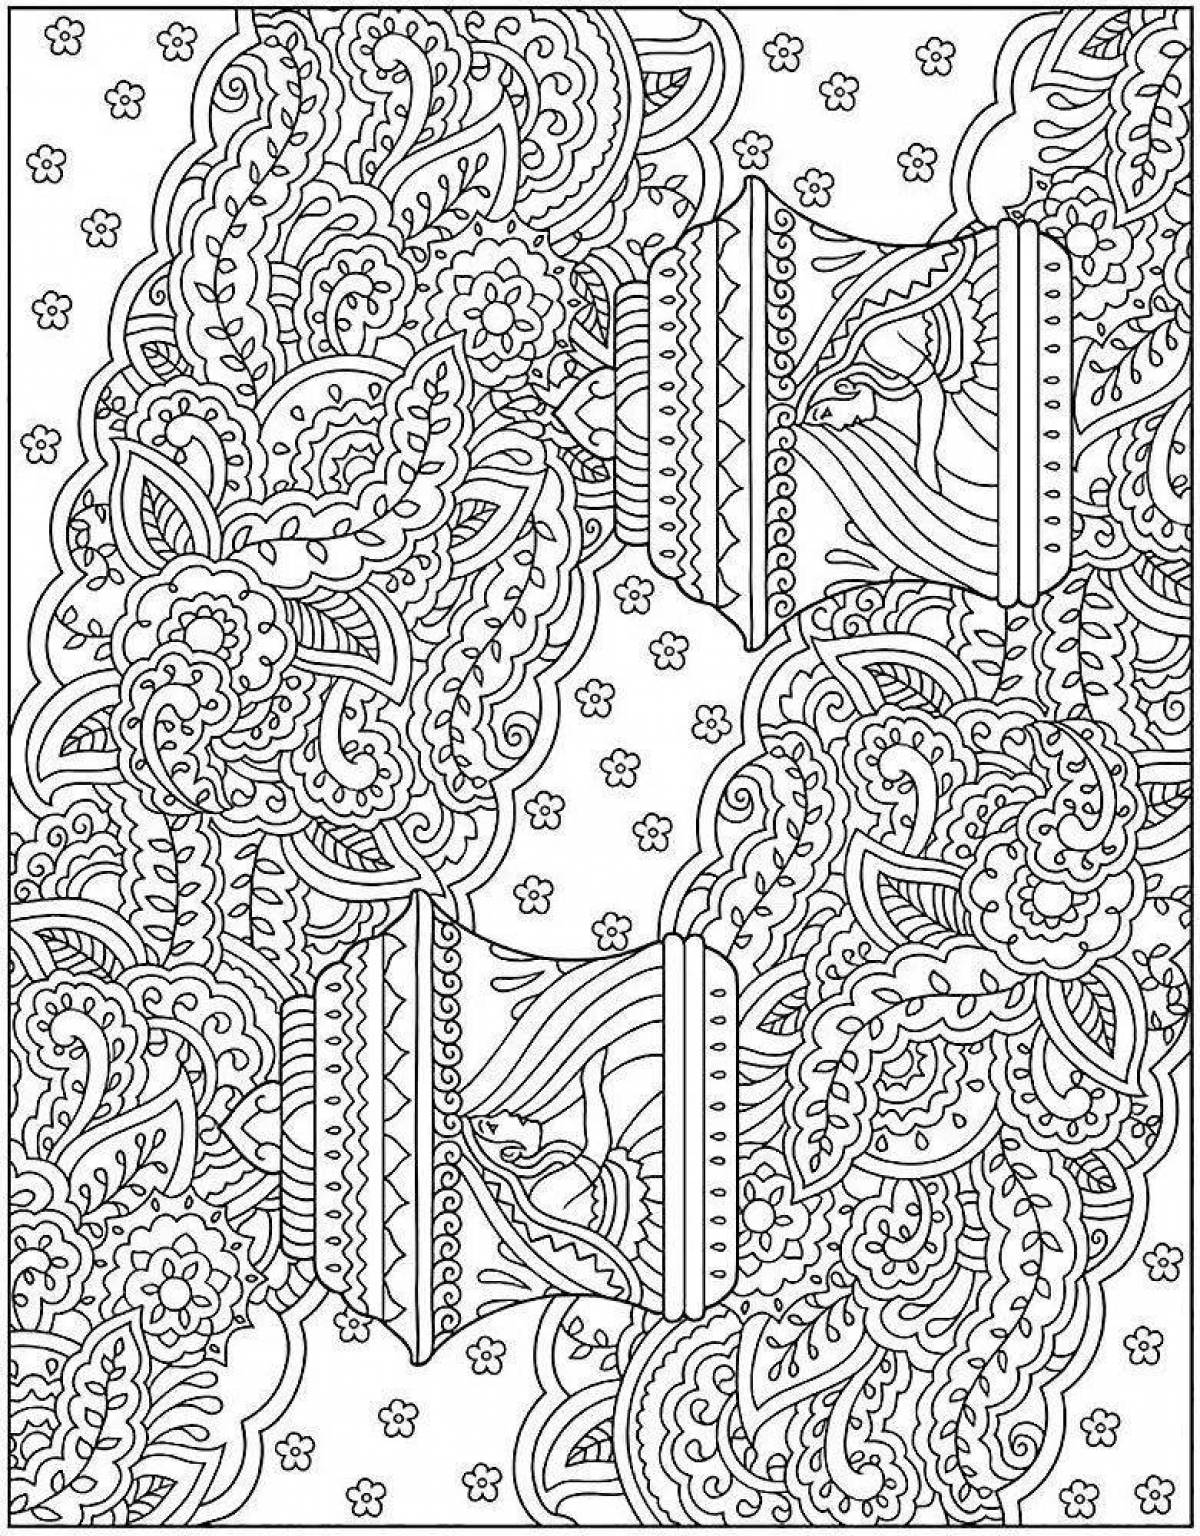 Coloring book intricate patterns - artistic